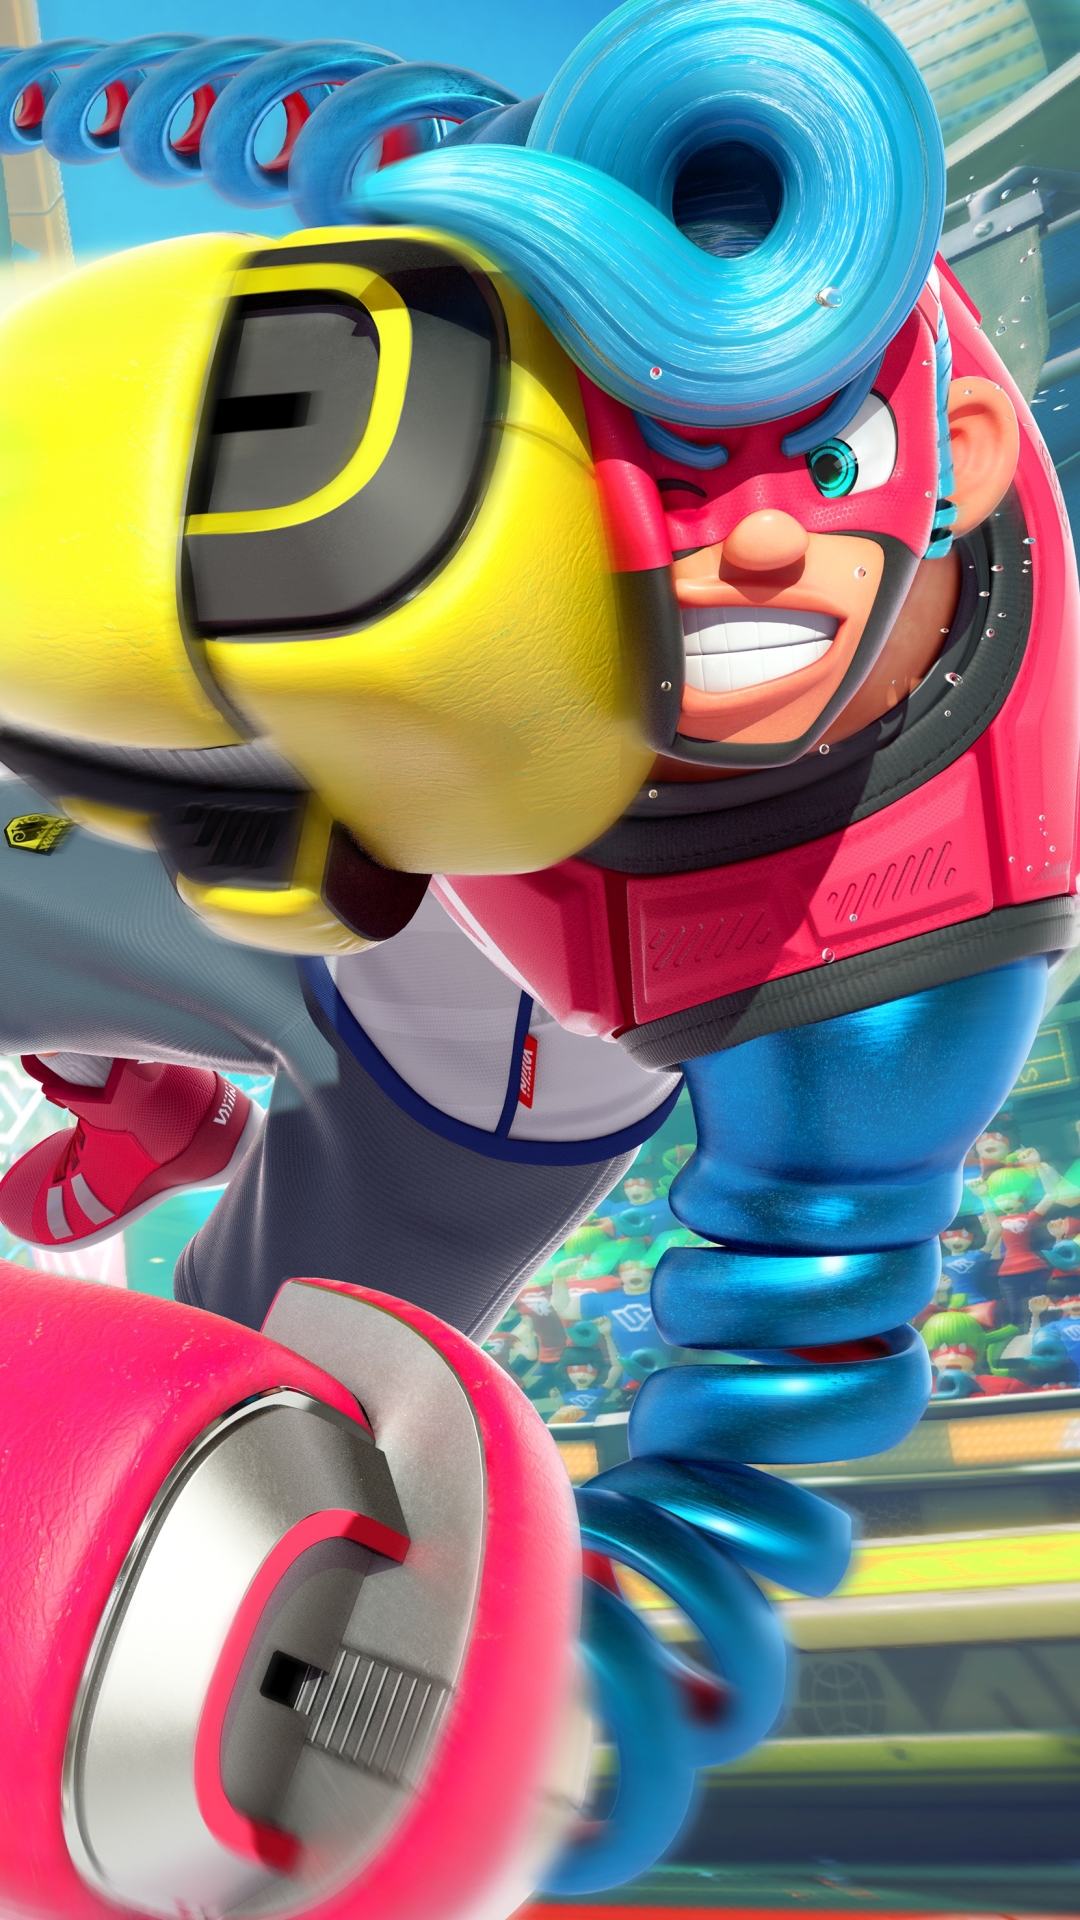 spring man (arms), video game, arms cellphone